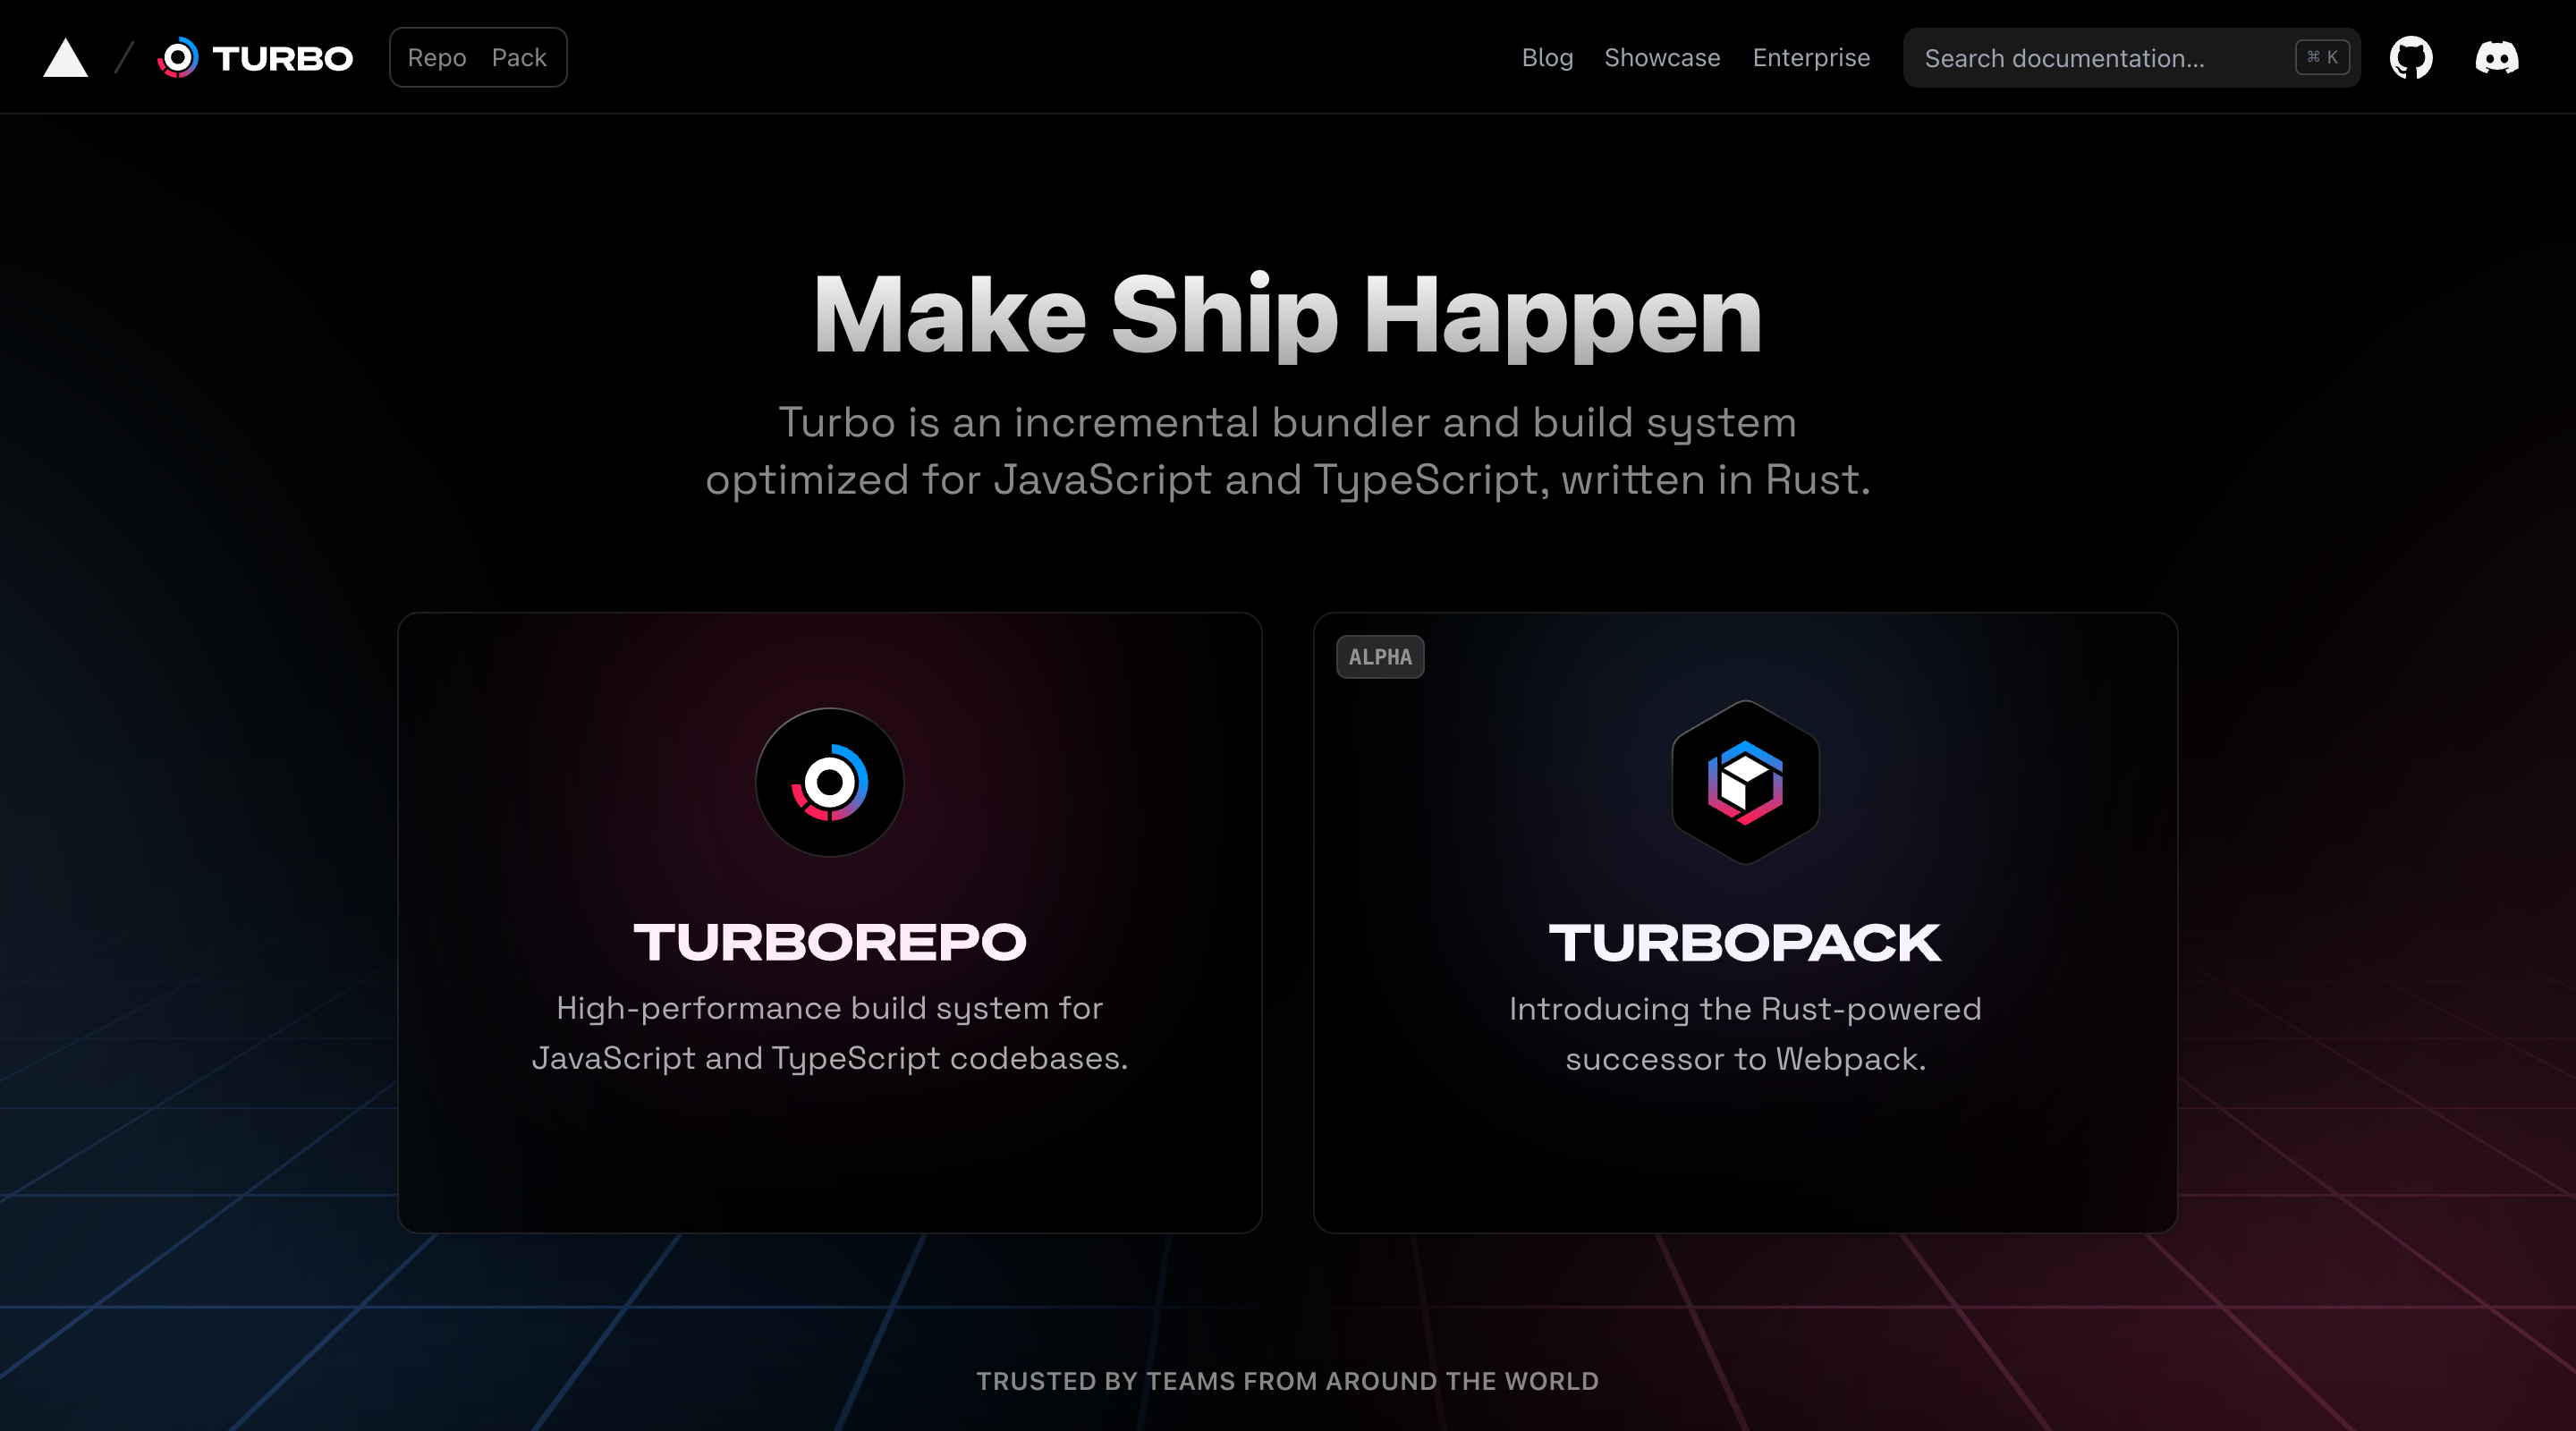 Screenshot of the Turbo homepage. The page’s primary purpose is to link to the different products in the Turbo stack: Turborepo and Turbopack. The headline says “Make Ship Happen,” there’s a subheadline, and below it, two big cards linking to Turborepo and Turbopack.